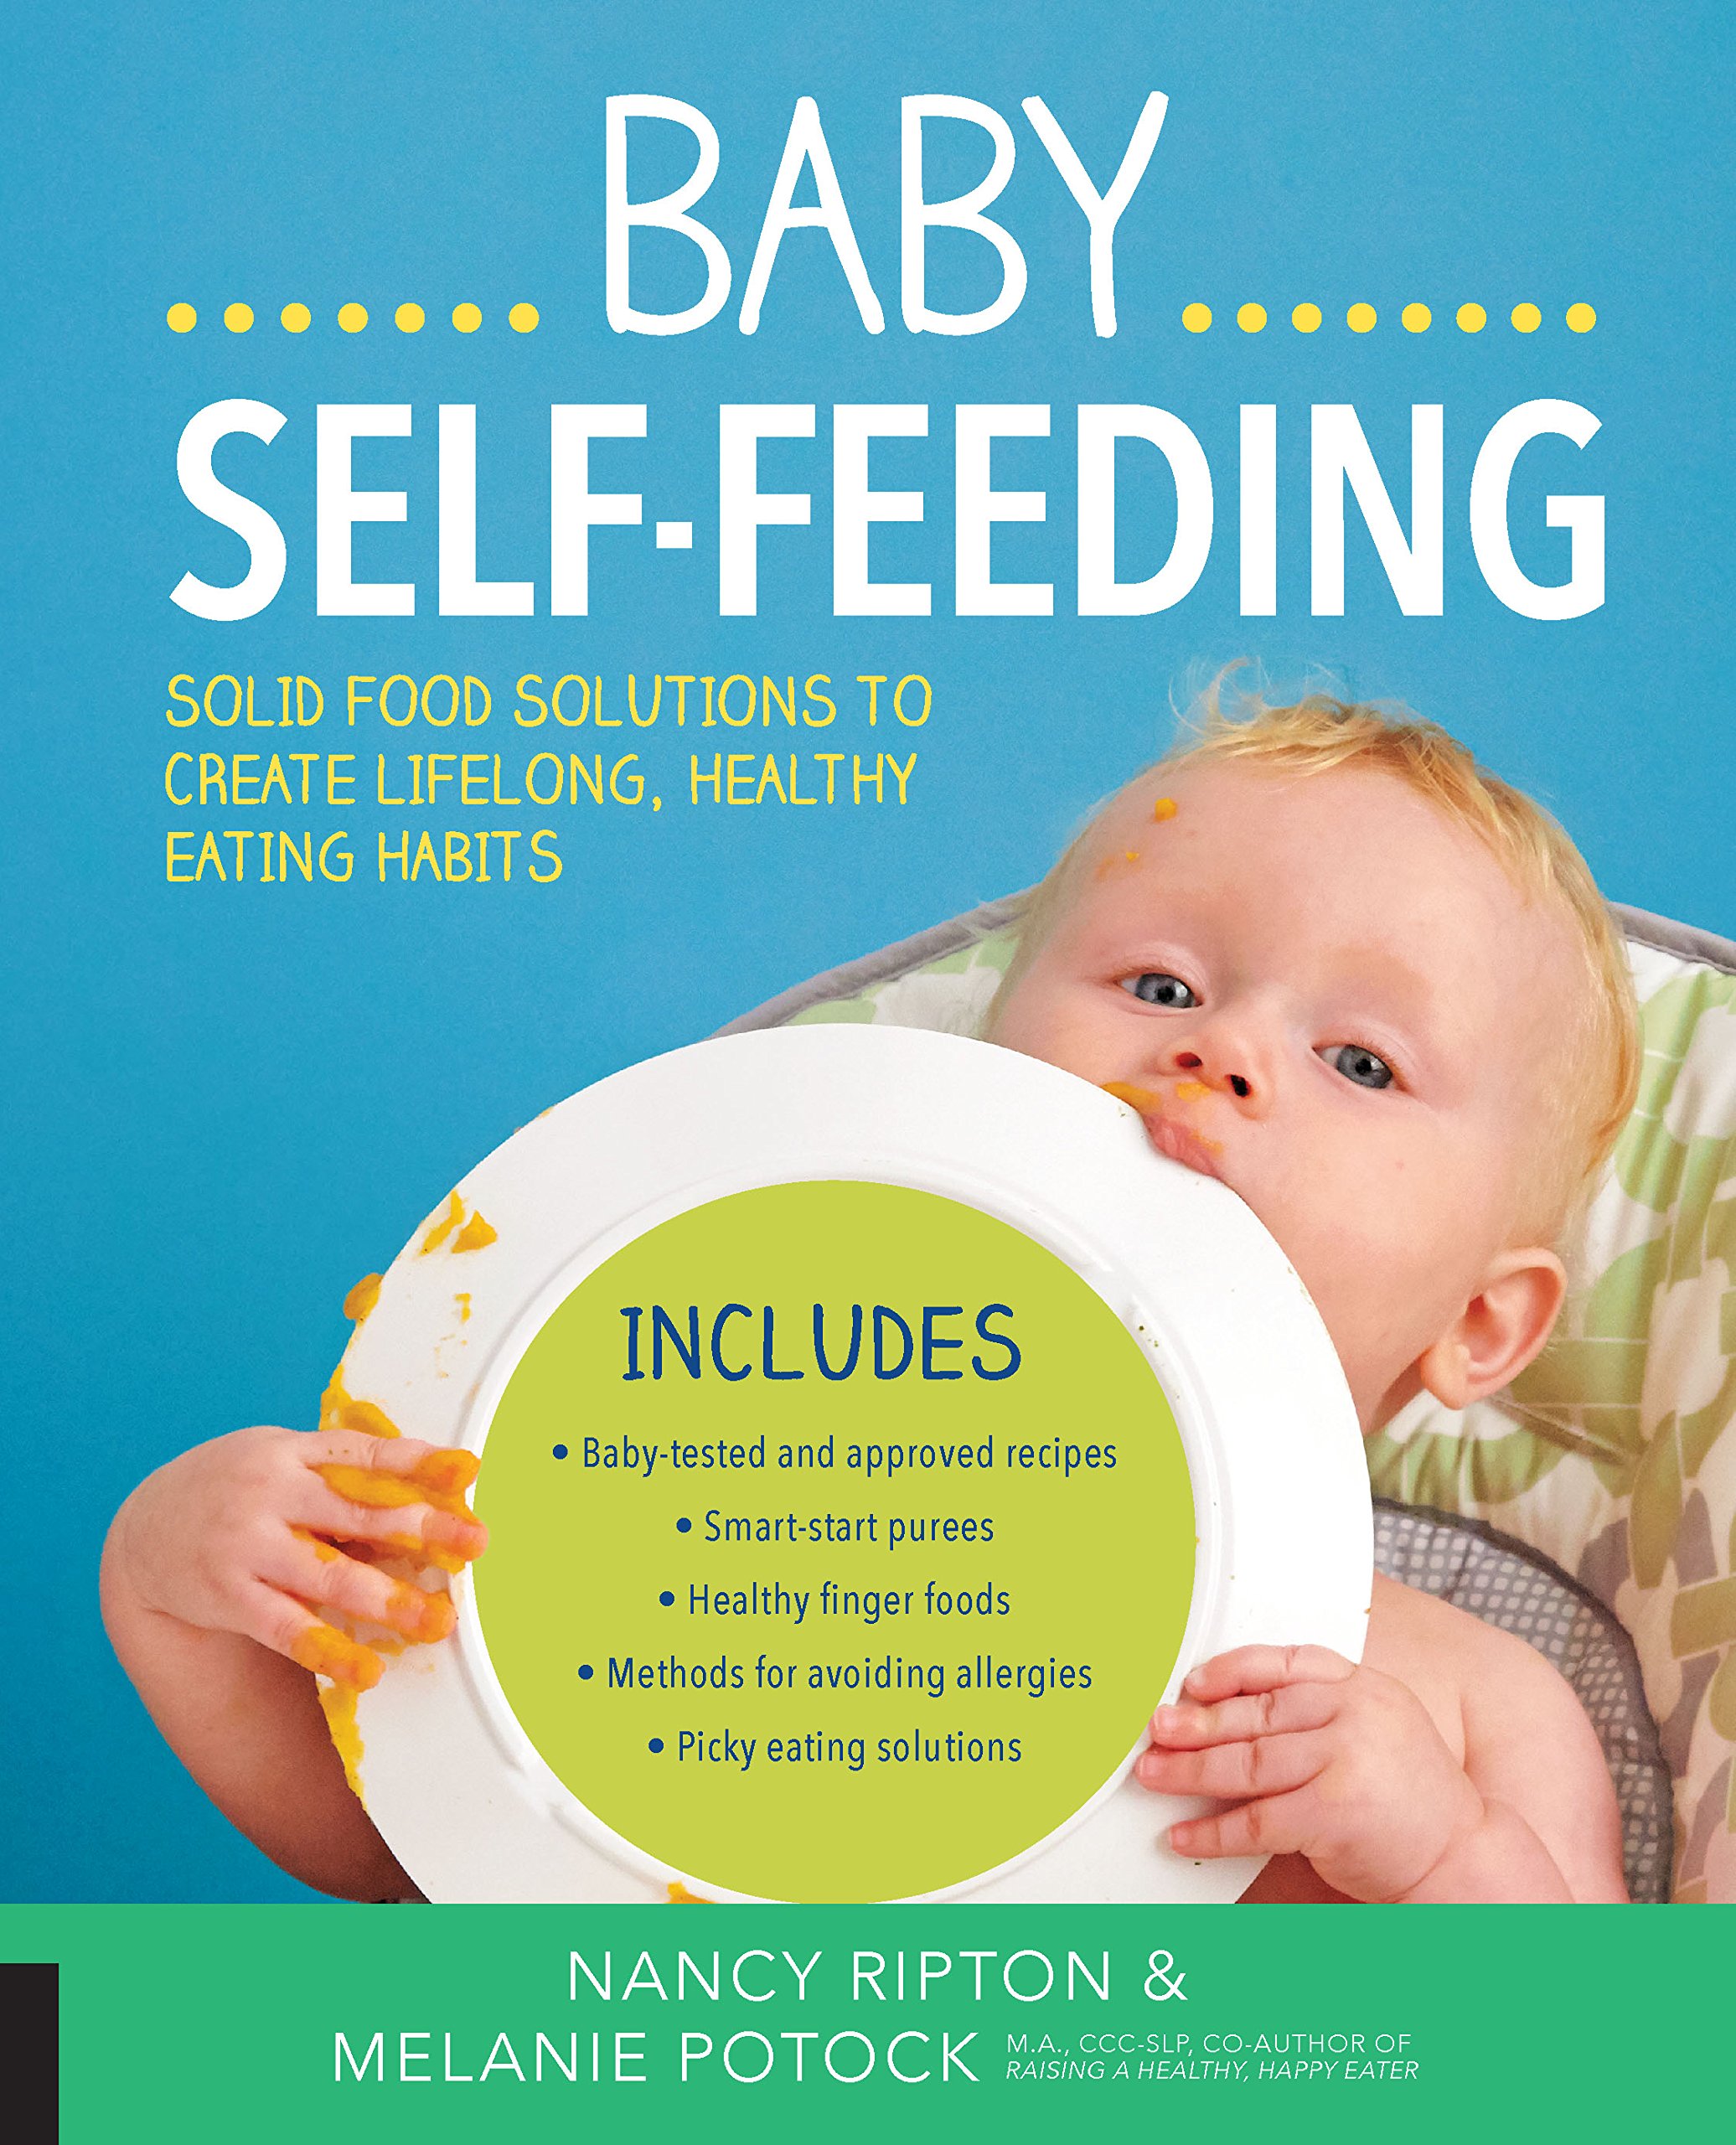 Baby Self-Feeding: Solutions For Introducing Purees And Solids To Create Lifelong, Healthy Eating Habits